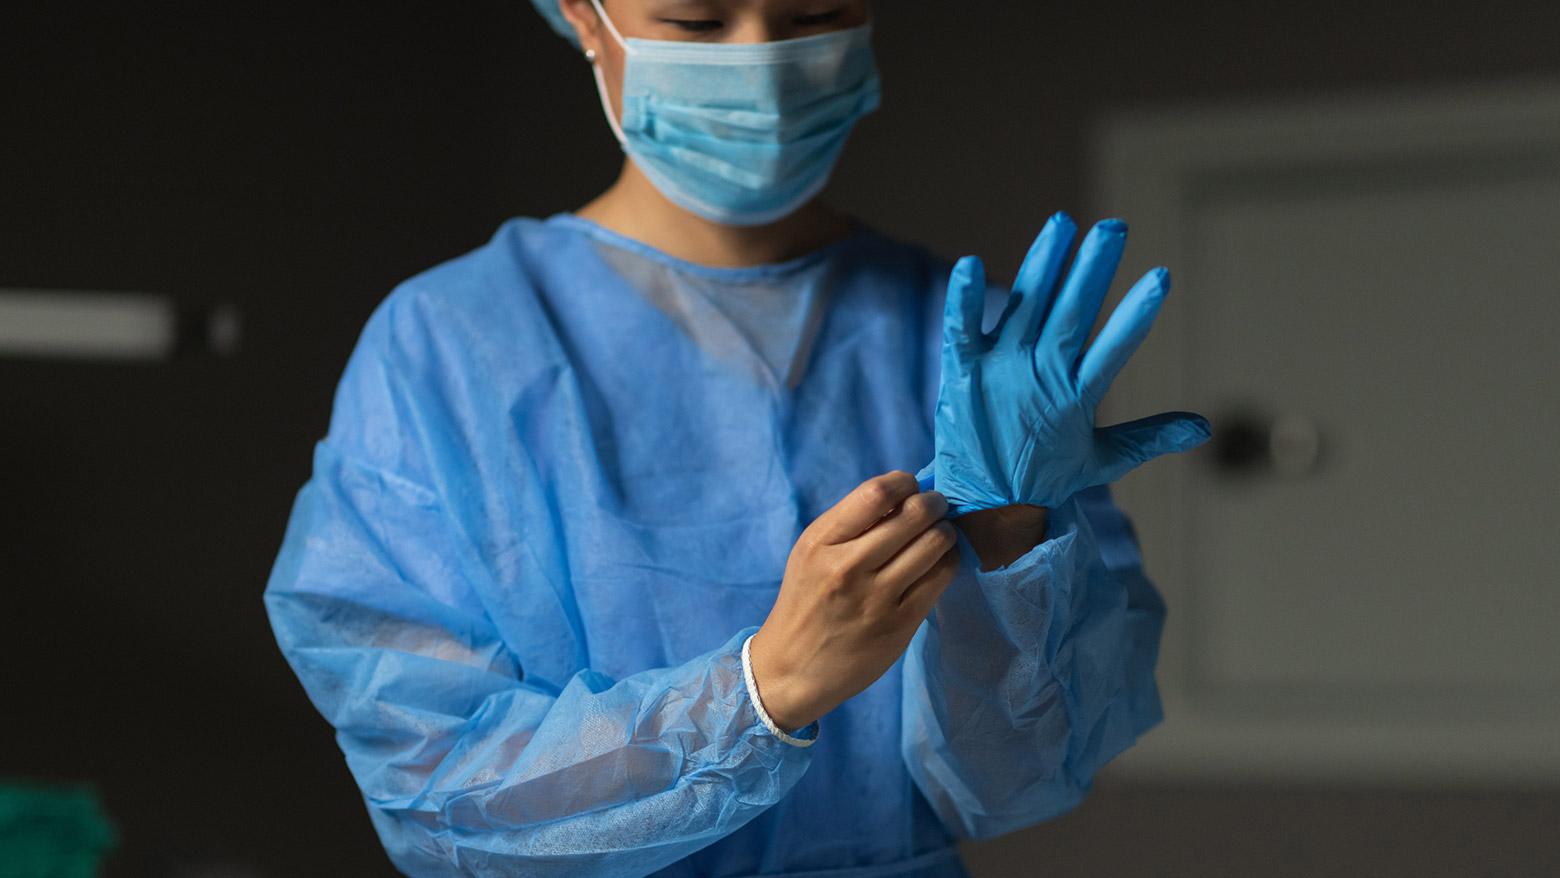 A female doctor wears a medical mask and a surgical gown while putting on medical gloves